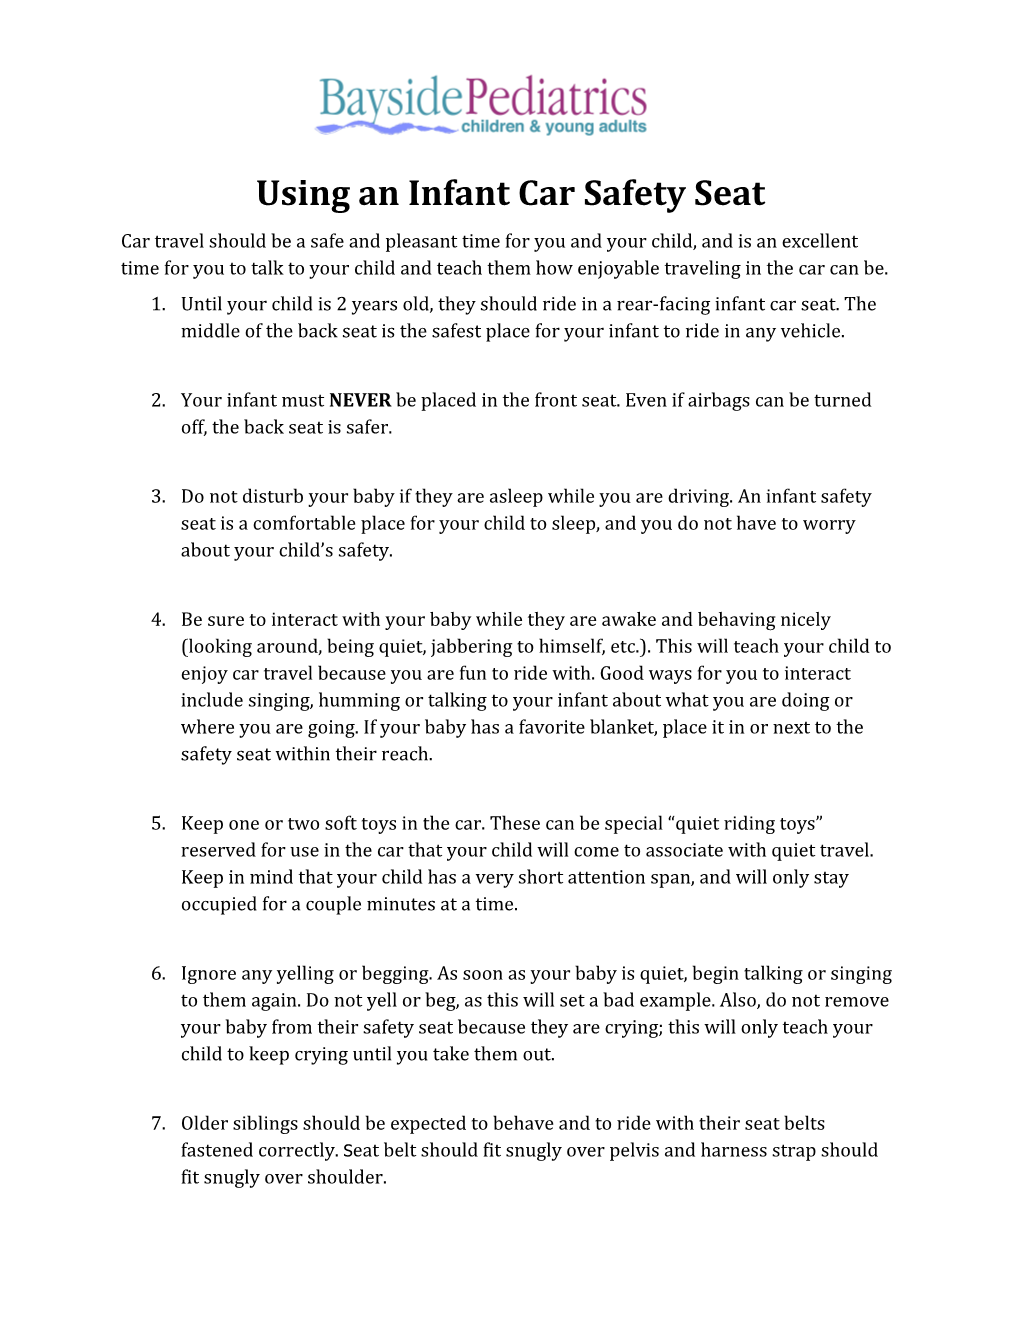 Using an Infant Car Safety Seat